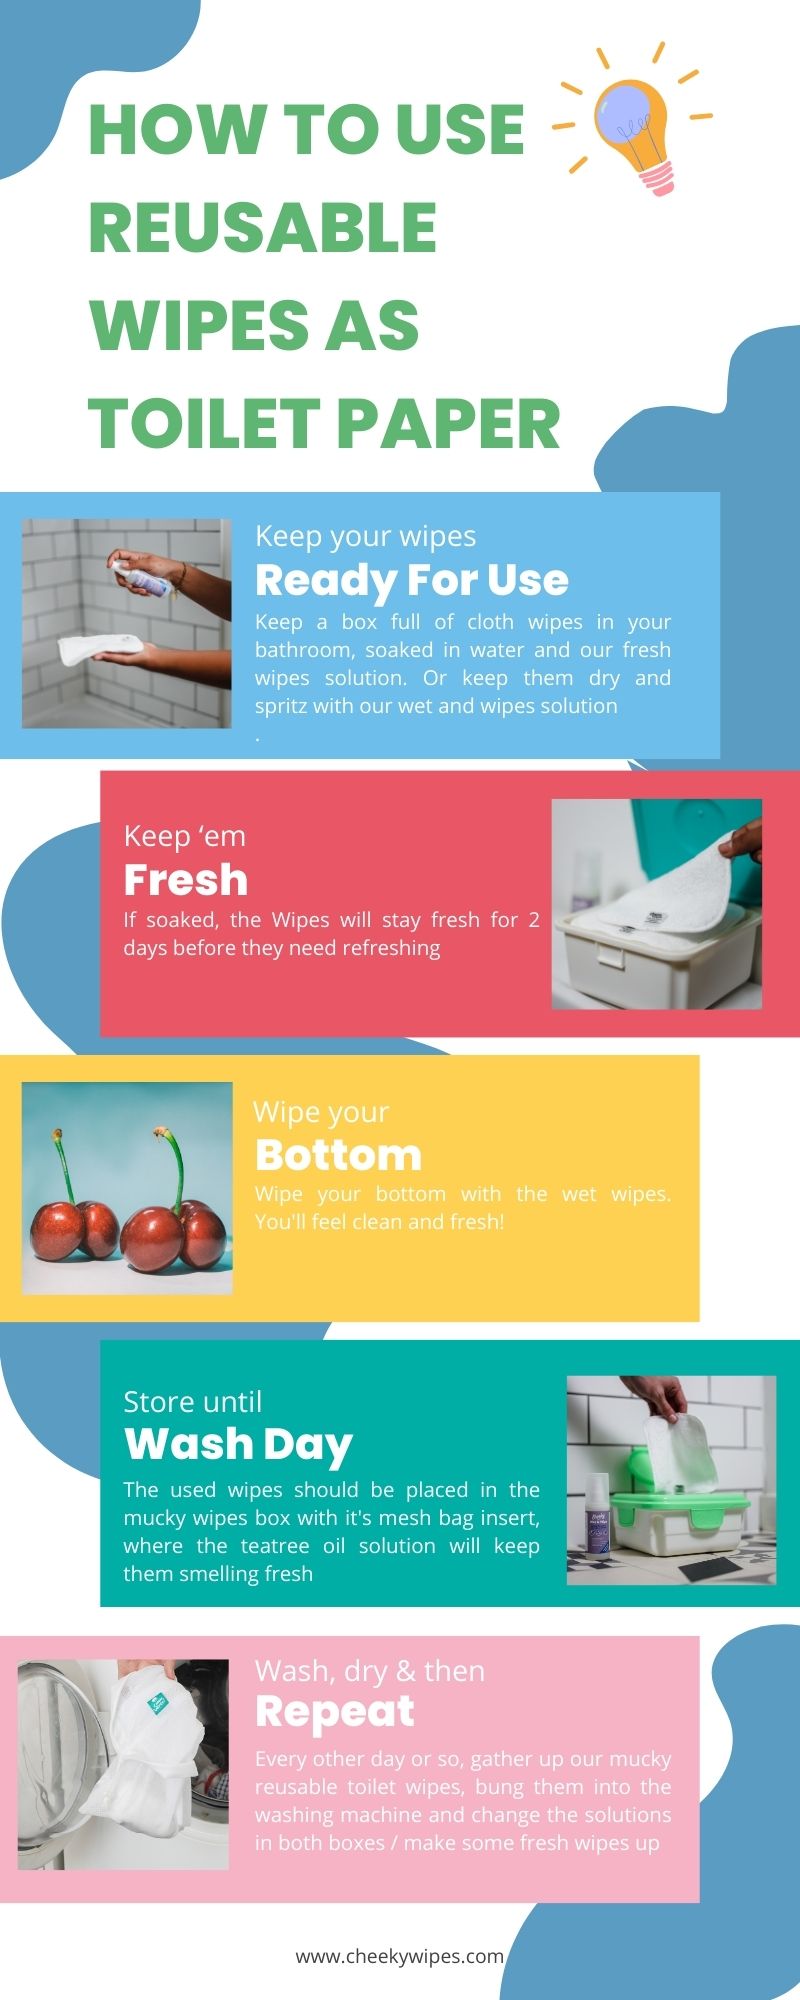 How to use reusable wipes as toilet paper - Infographic